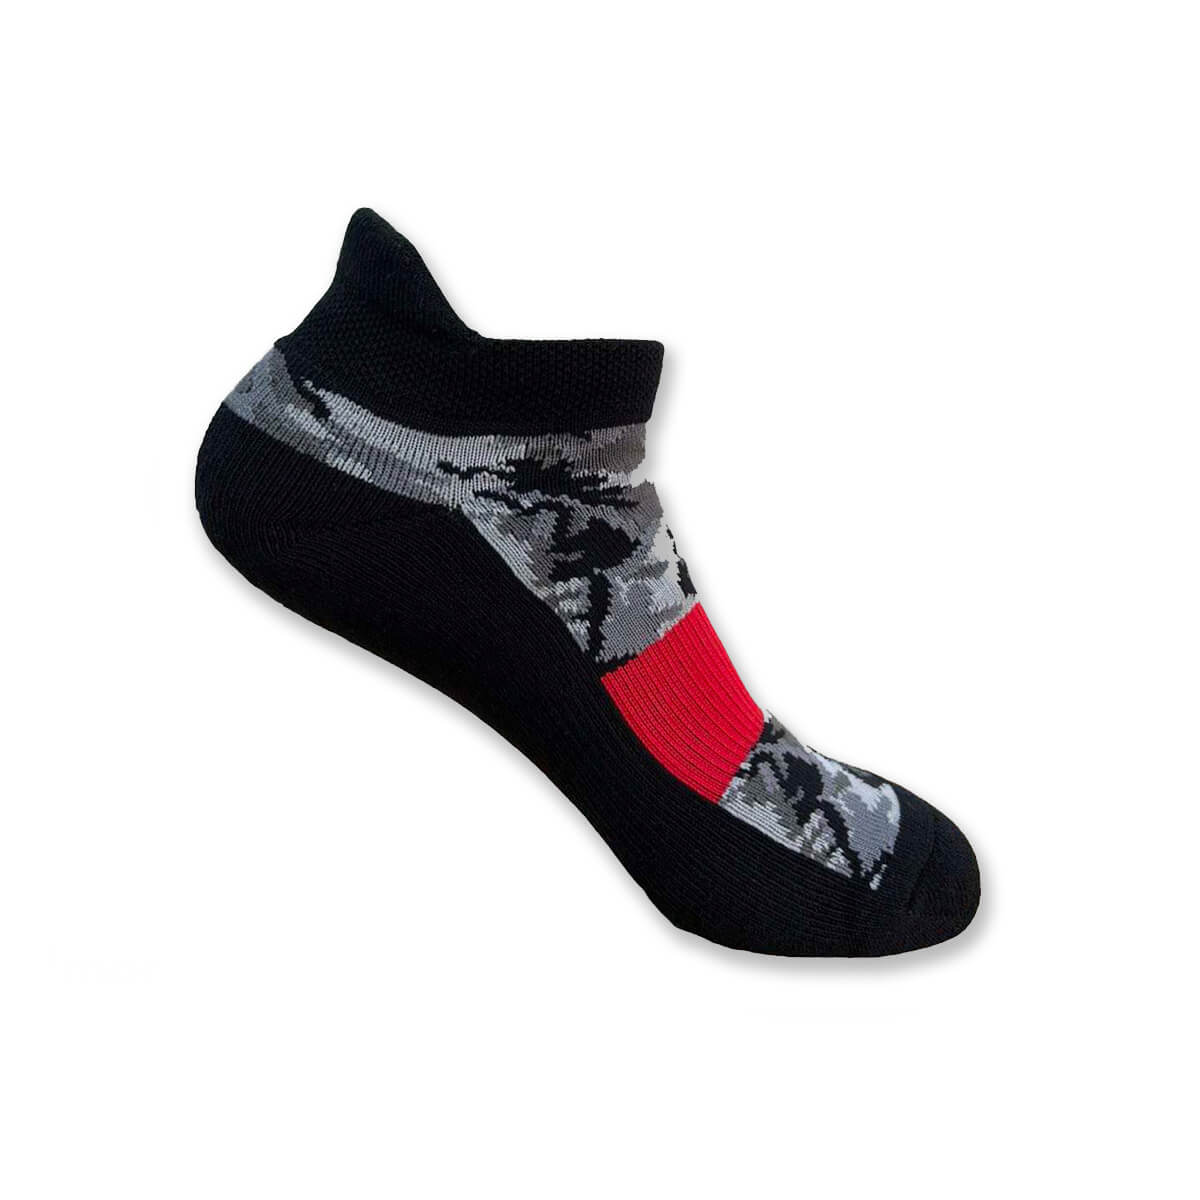 Modern Envy Everyday comfort ankle sock in Midnight Camouflage with Red arch band